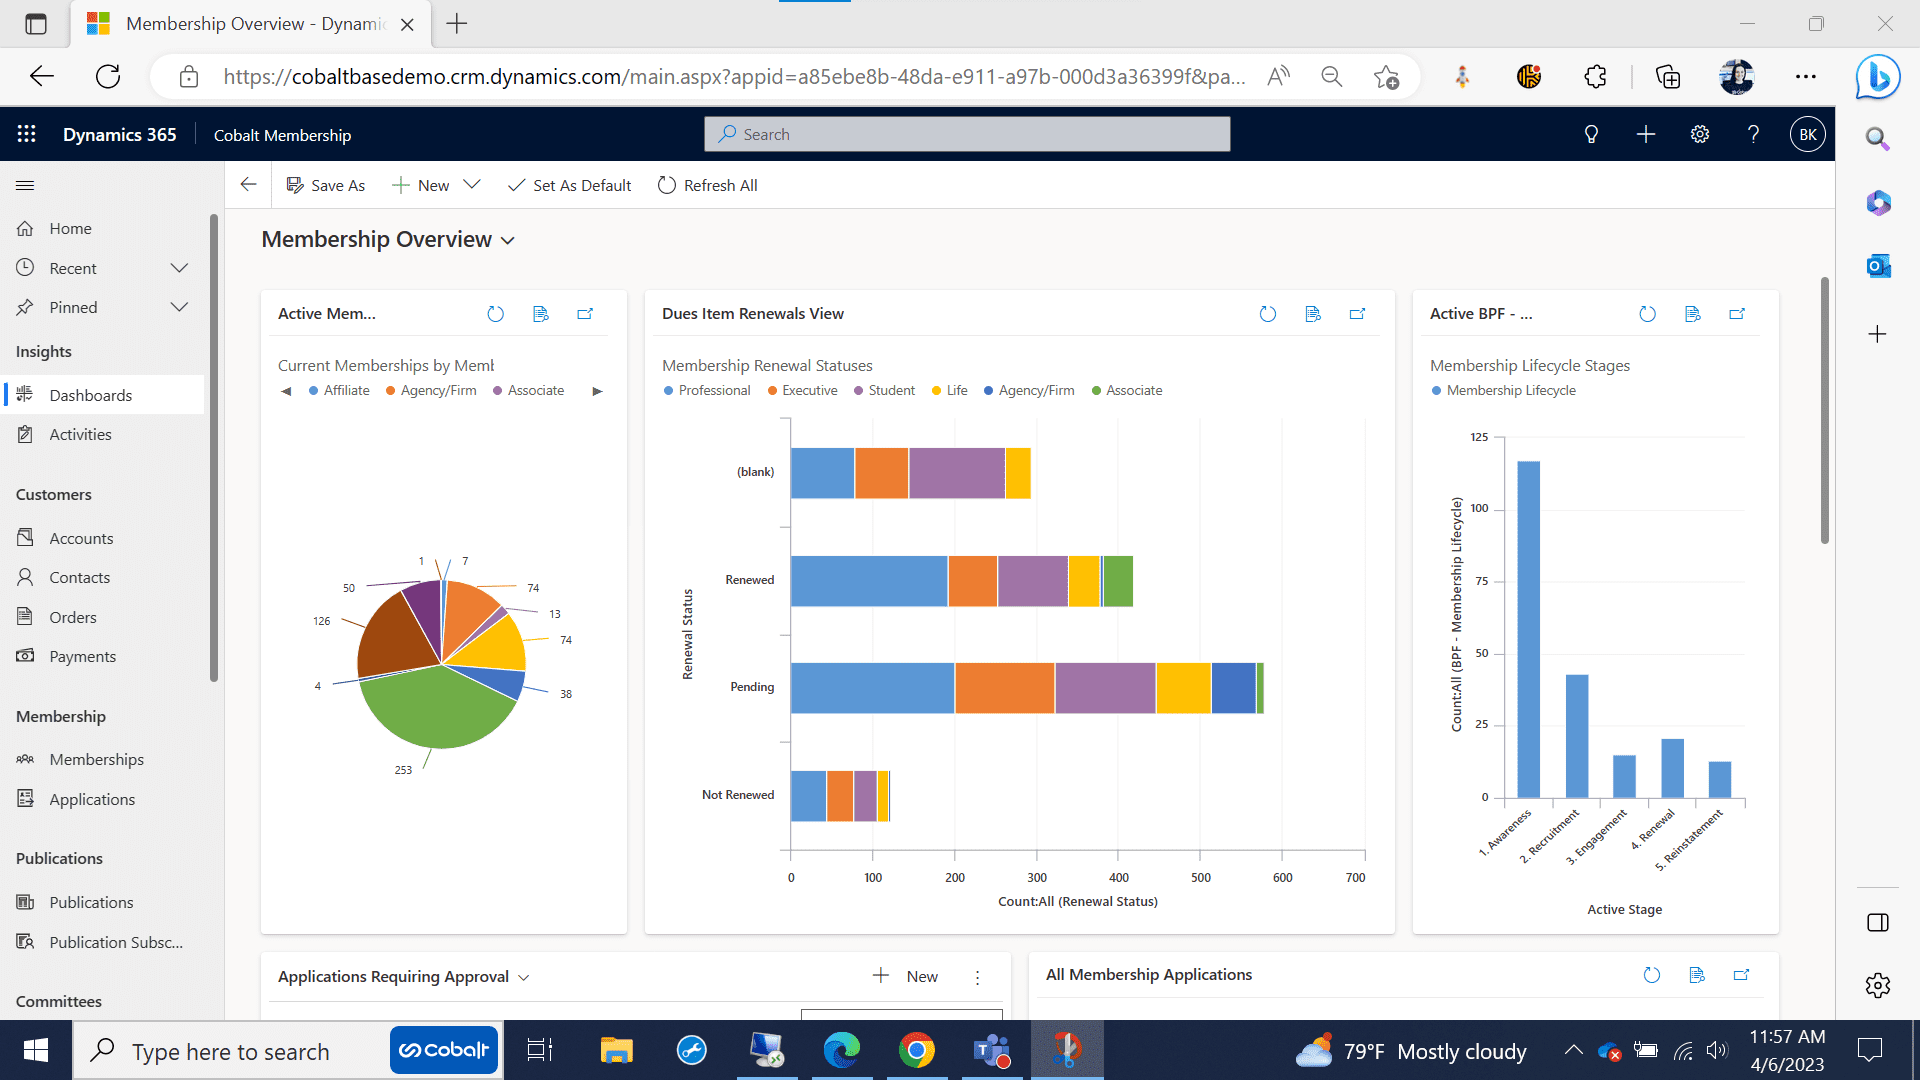 Modern AMS systems have robust dashboards like this one in Cobalt's Engagement Dynamics, featuring a color-coded pie chart for membership type, a segmented bar graph depicting dues renewals by category, and a simple bar graph illustrating the membership lifecycle stages by percentage. All of the dashboard modules are housed directly in the AMS system's interface inside Microsoft Dynamics 365.